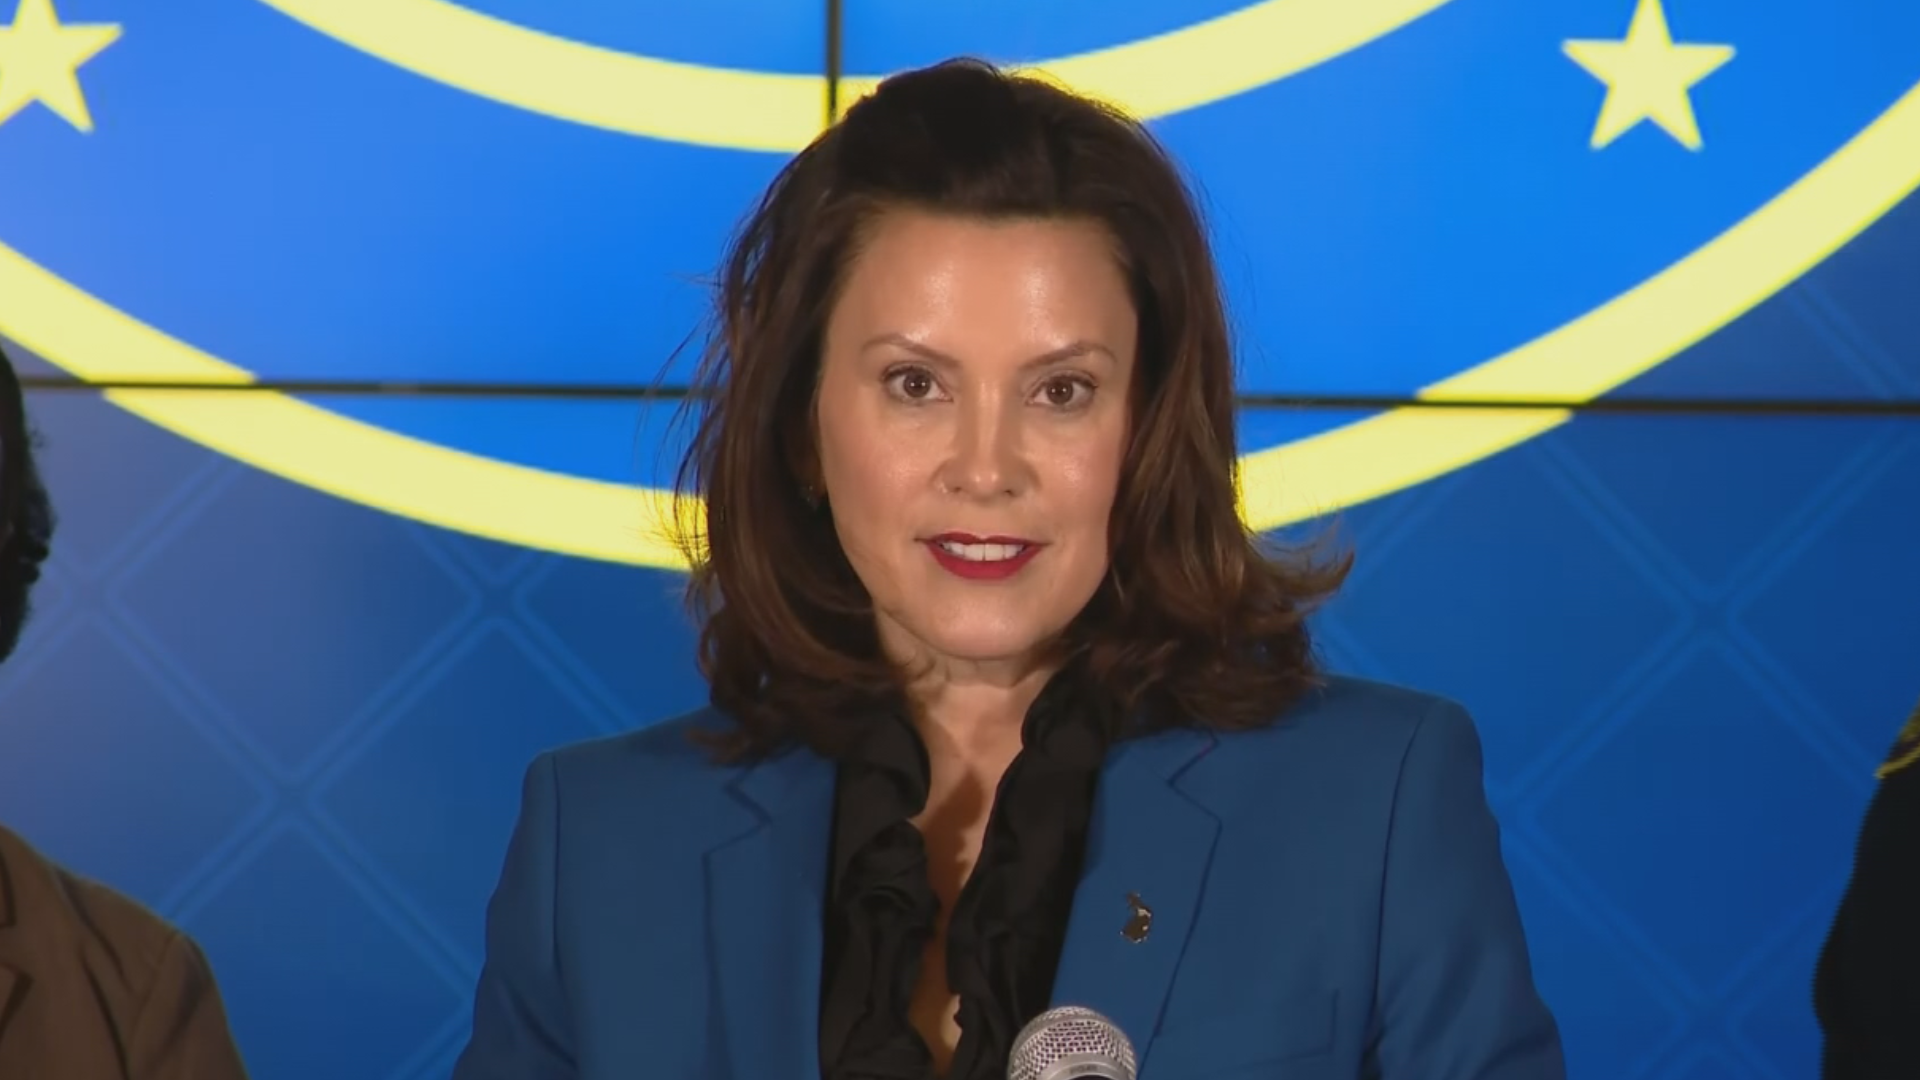 Gov. Gretchen Whitmer signed an executive order Friday that cancels or postponed events or shared-space gatherings over 250 people.